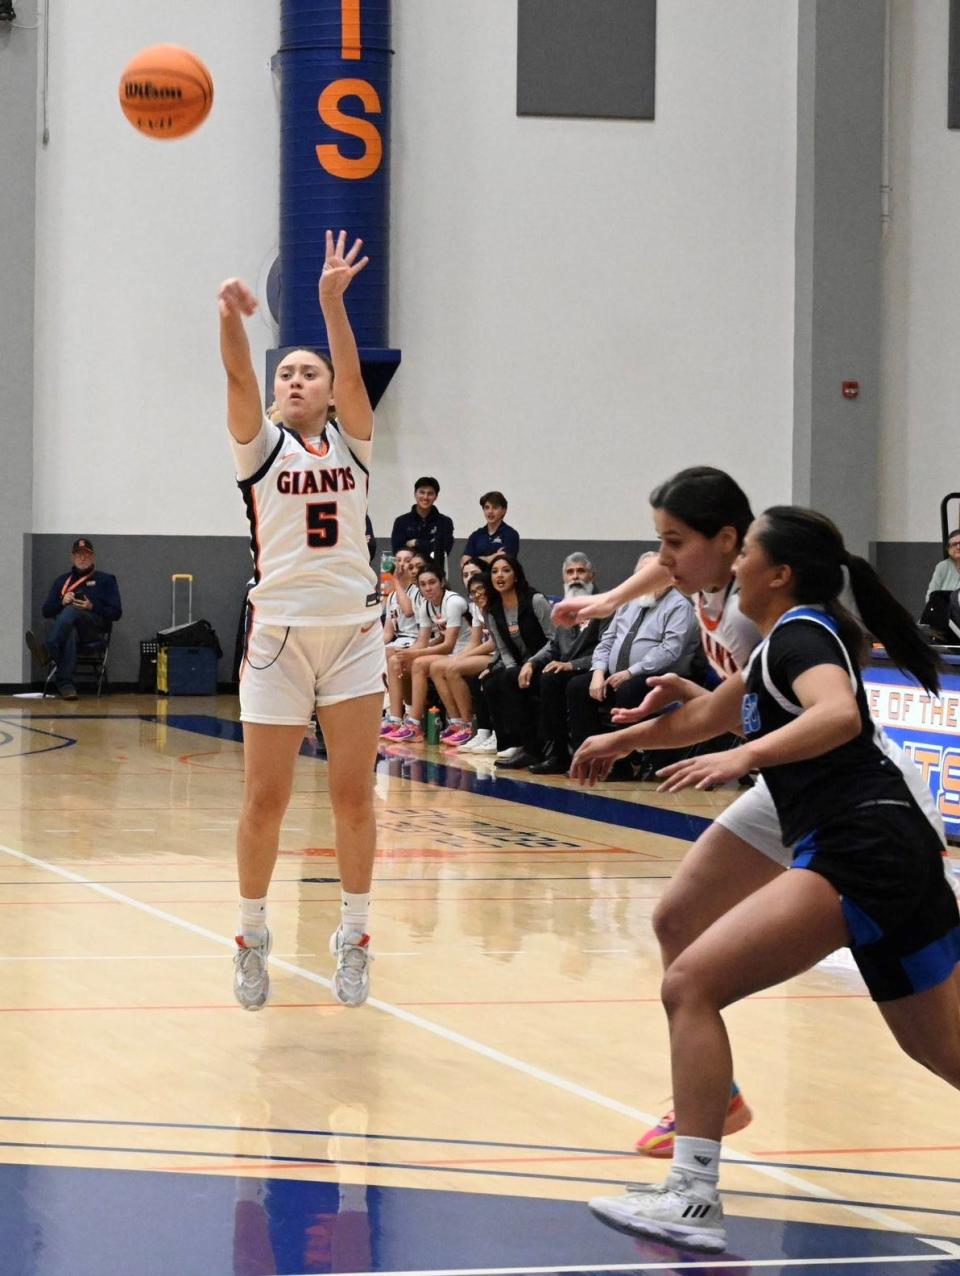 Camila Barreno scored 24 points to direct the College of the Sequoias to a playoff victory against San Mateo.